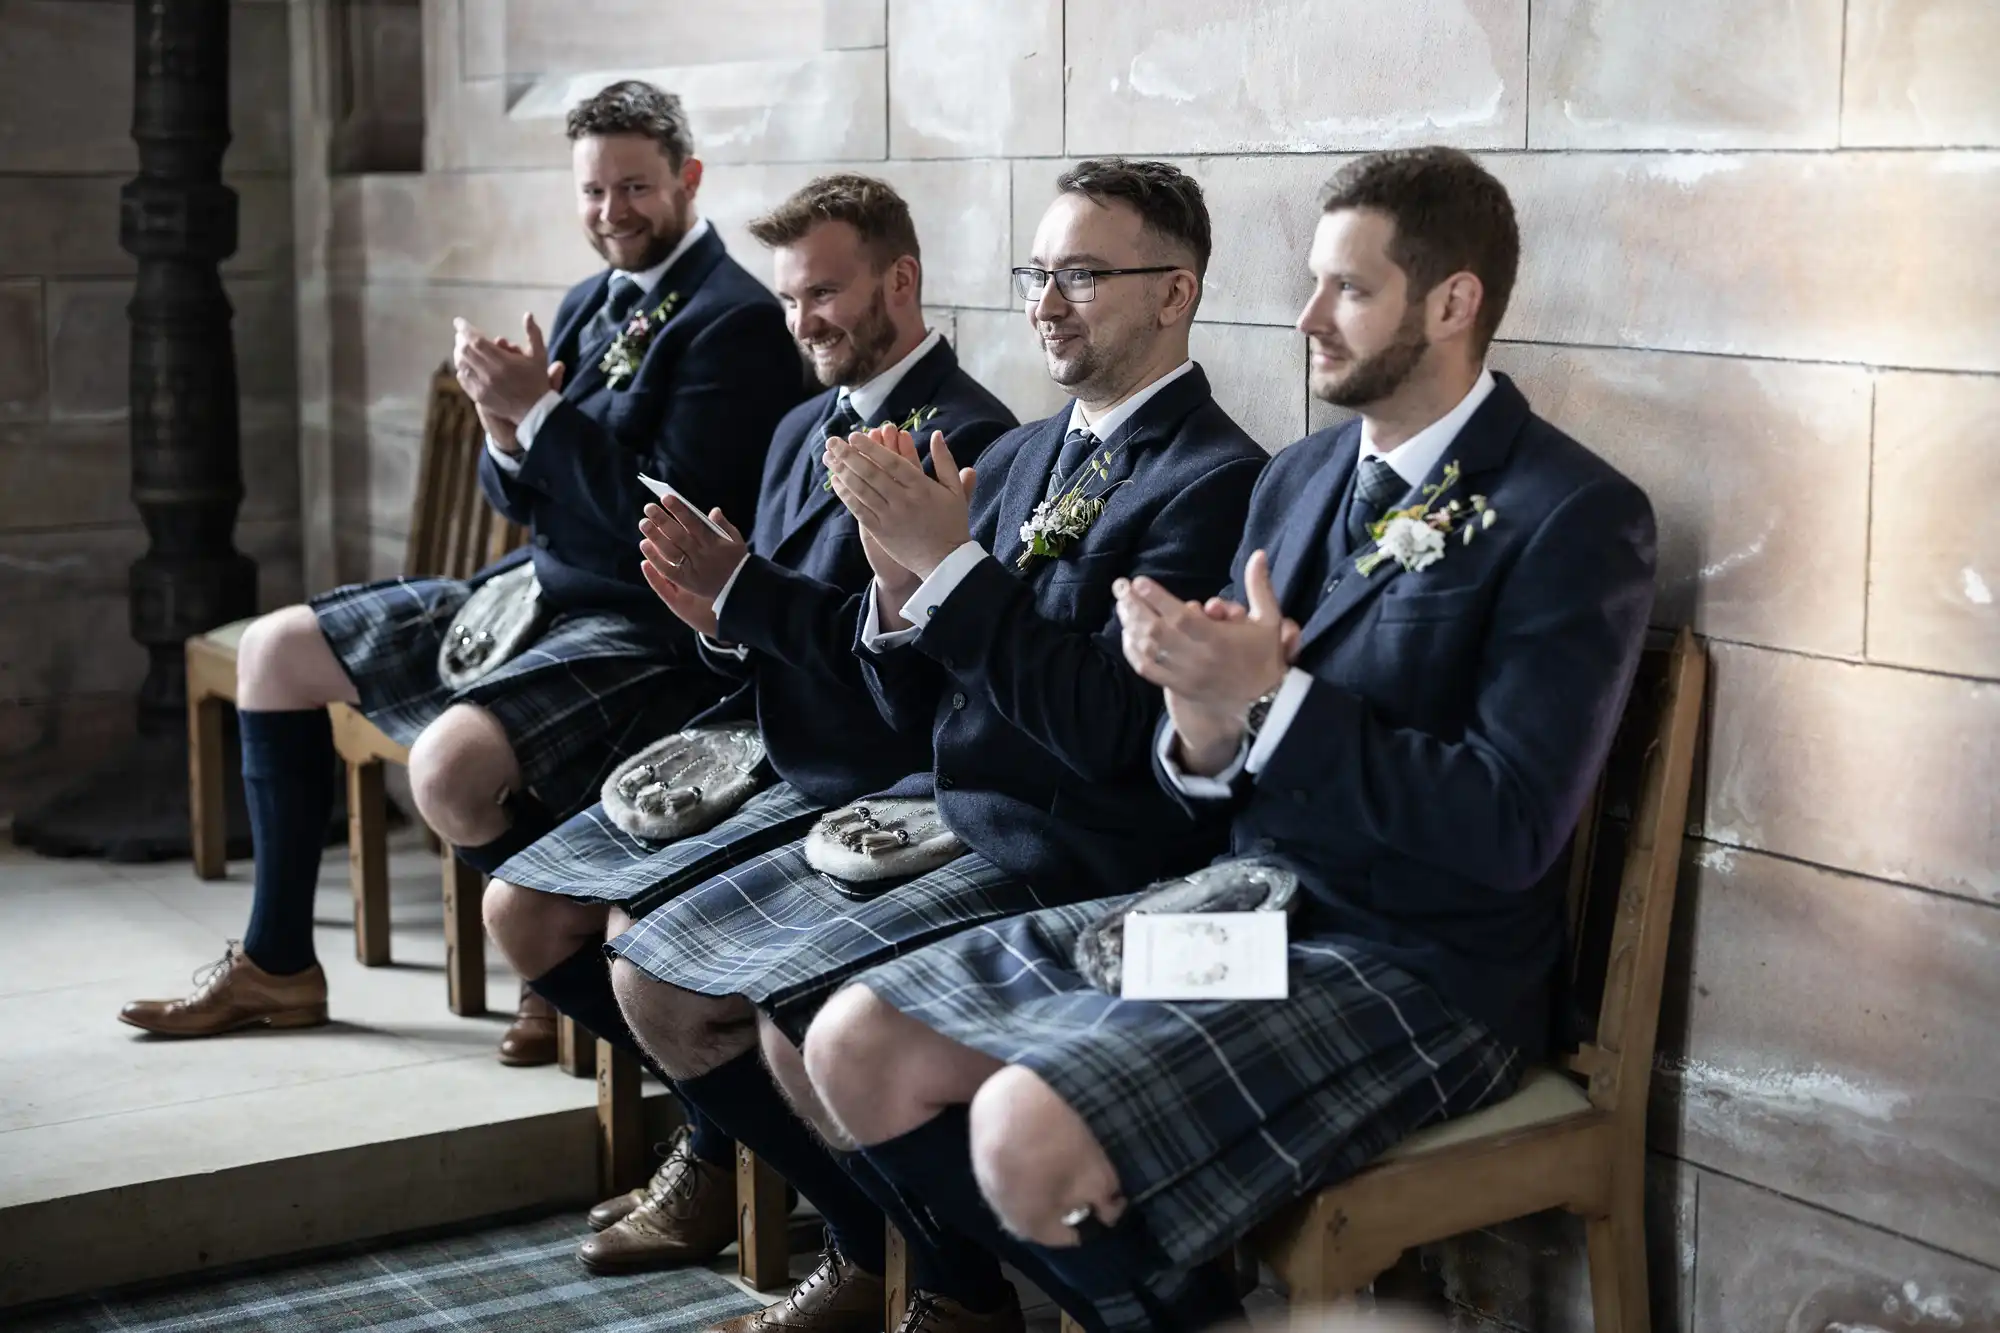 Four men in traditional kilts and blazers clapping while seated on a stone bench indoors.